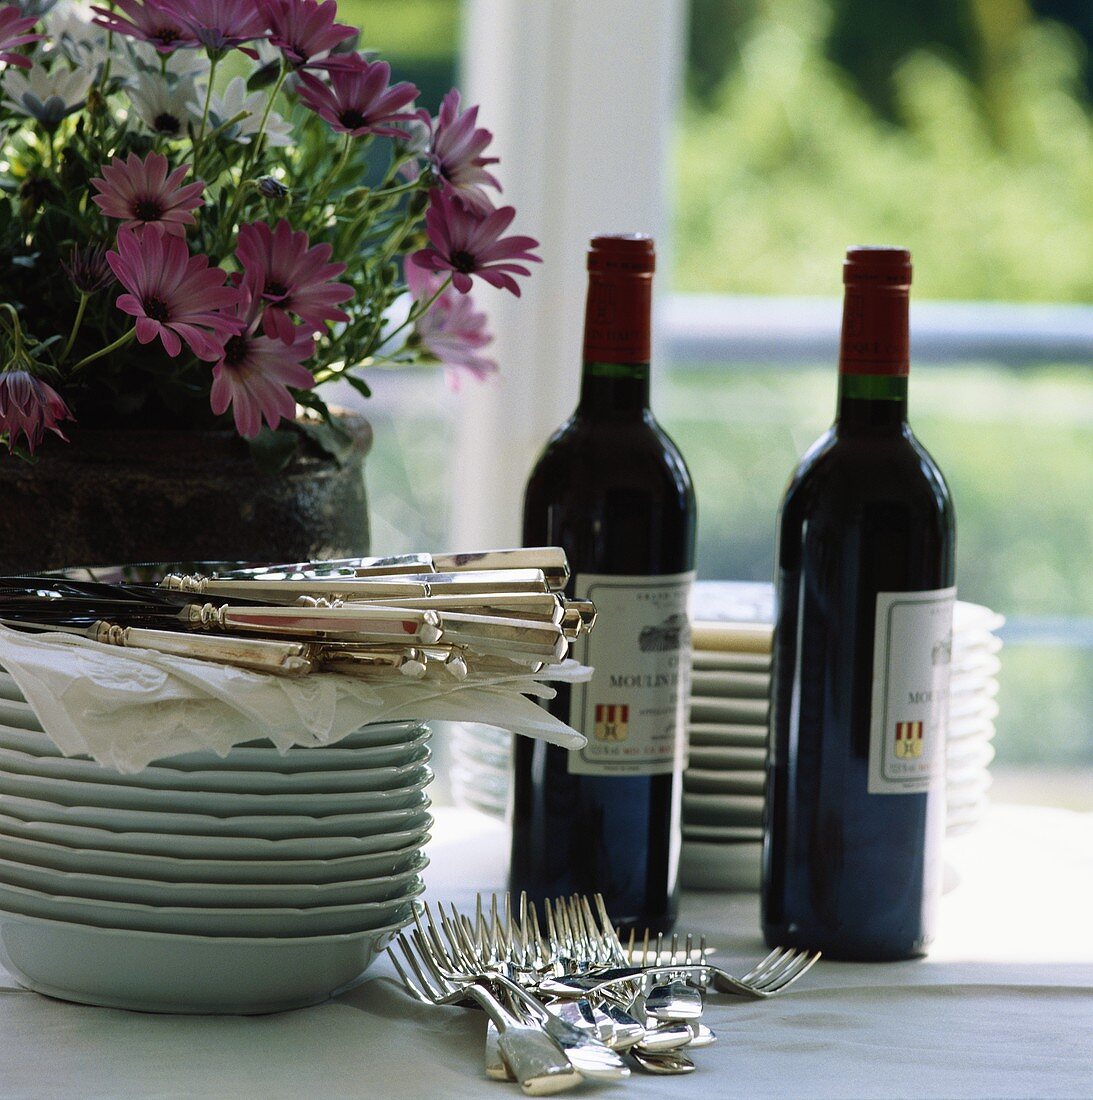 Pile of plates, cutlery, red wine and flowers on table